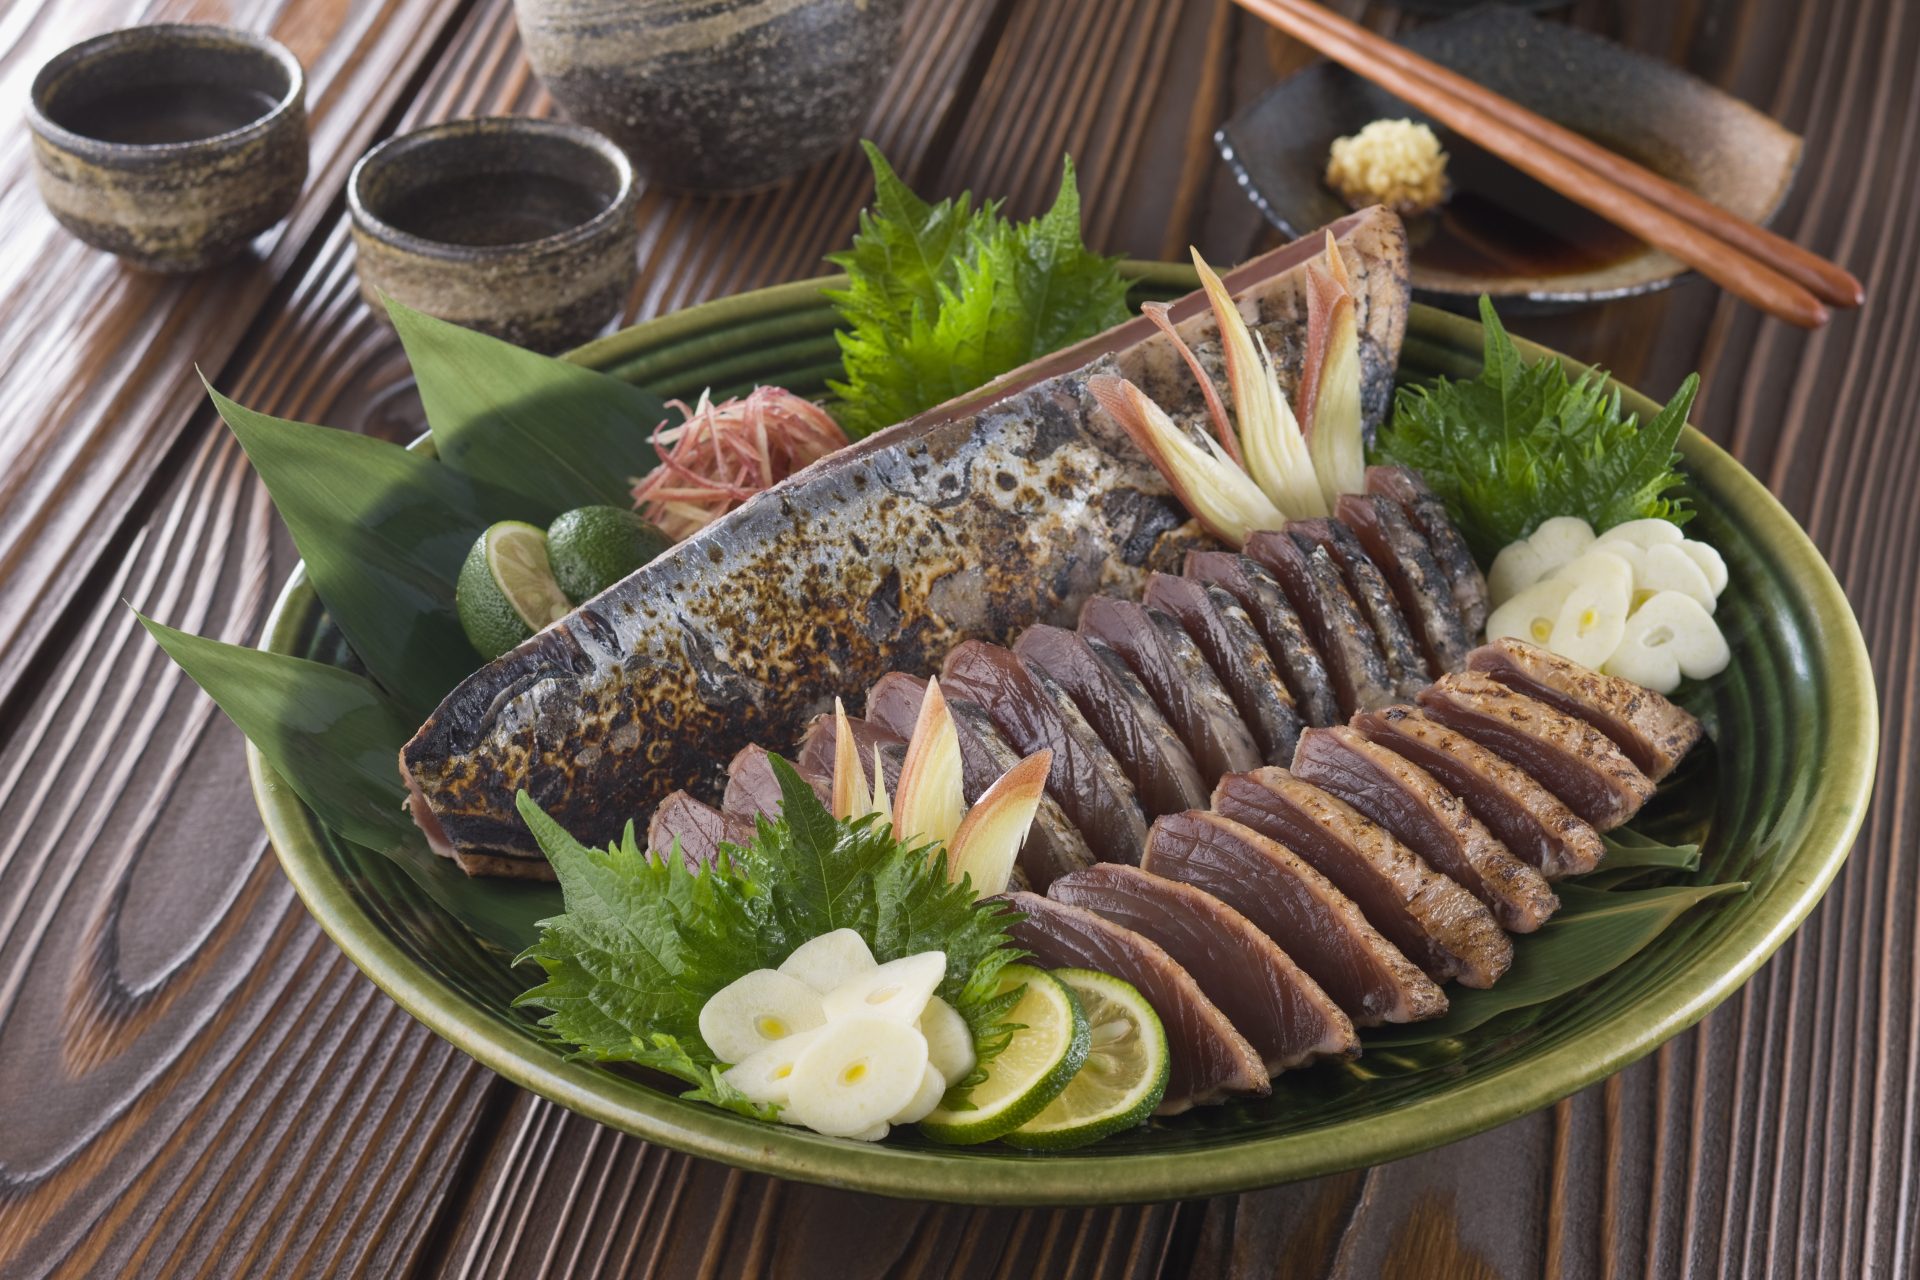 <p>When you think of Kochi, you think of Bonito. According to one theory, Kochi is the birthplace of Bonito tataki. It is said that during the Edo period, when the Tosa feudal lord prohibited sashimi to avoid food poisoning, the people of Tosa, who really wanted to eat Bonito sashimi, seared the surface and ate it. They called it grilled fish, and this is how Bonito tataki began.</p>